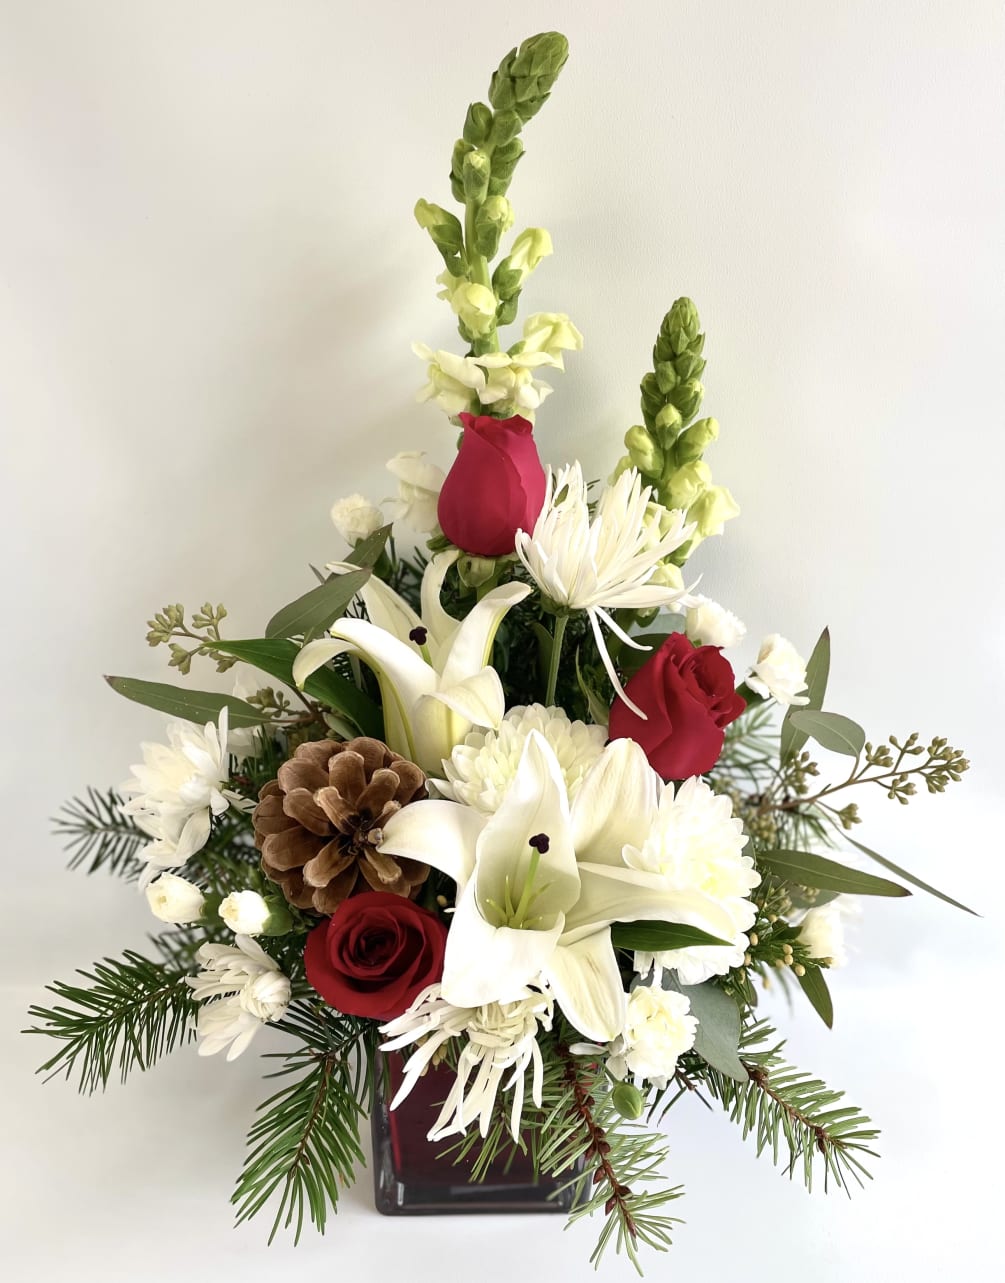 This arrangement will bring a very Merry Christmas to any one that